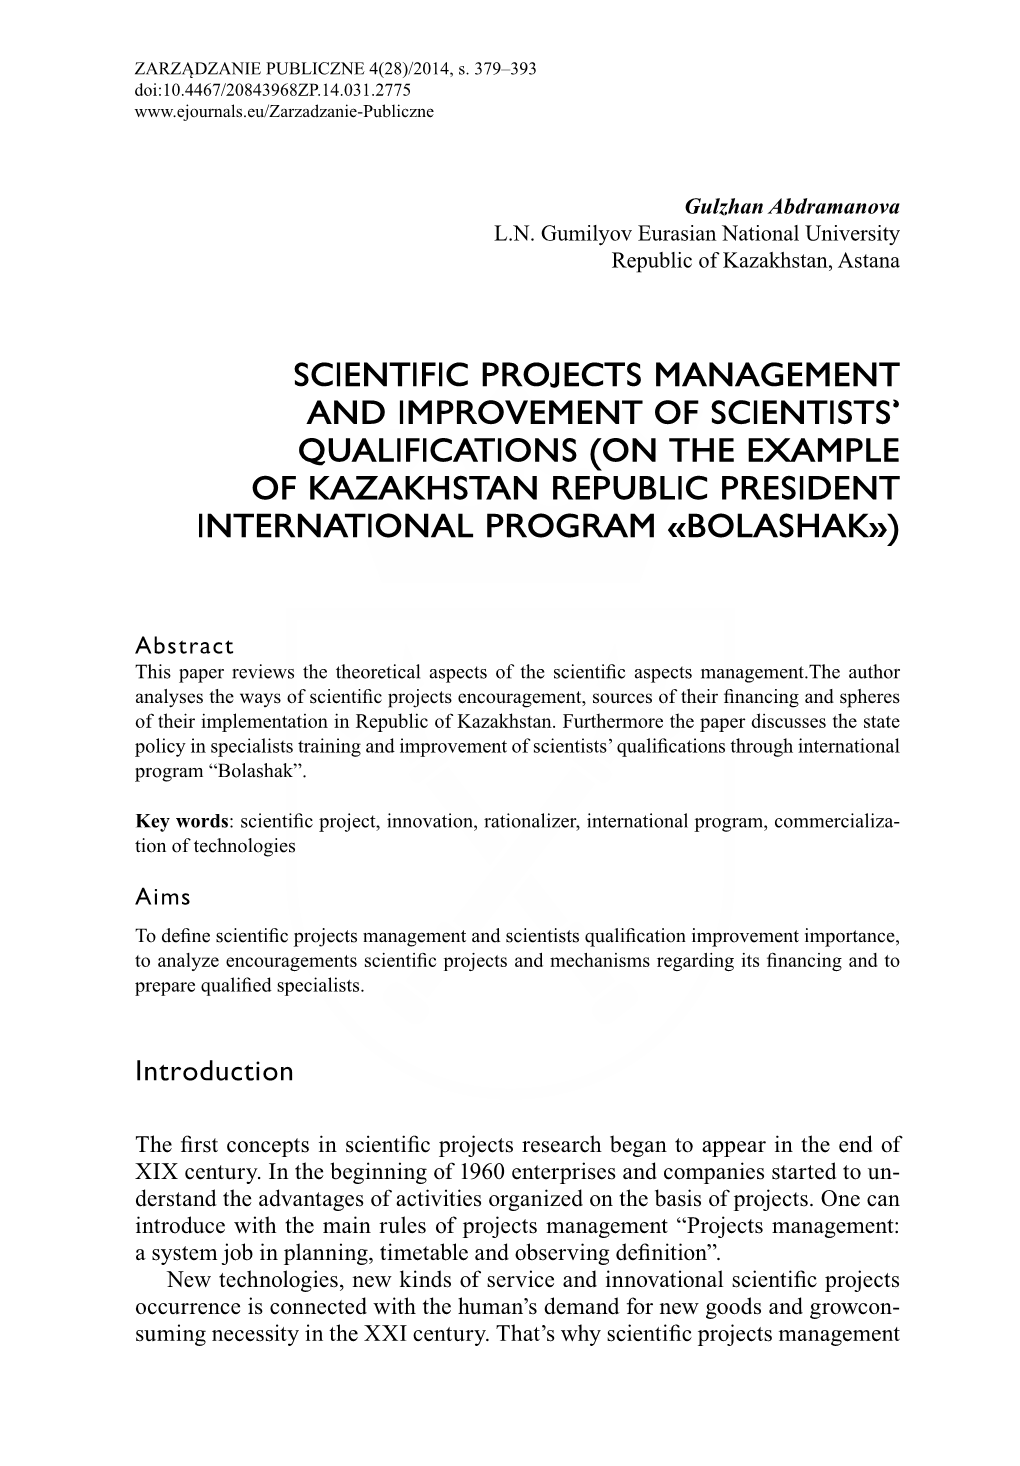 Scientific Projects Management and Improvement of Scientists’ Qualifications (On the Example of Kazakhstan Republic President International Program «Bolashak»)